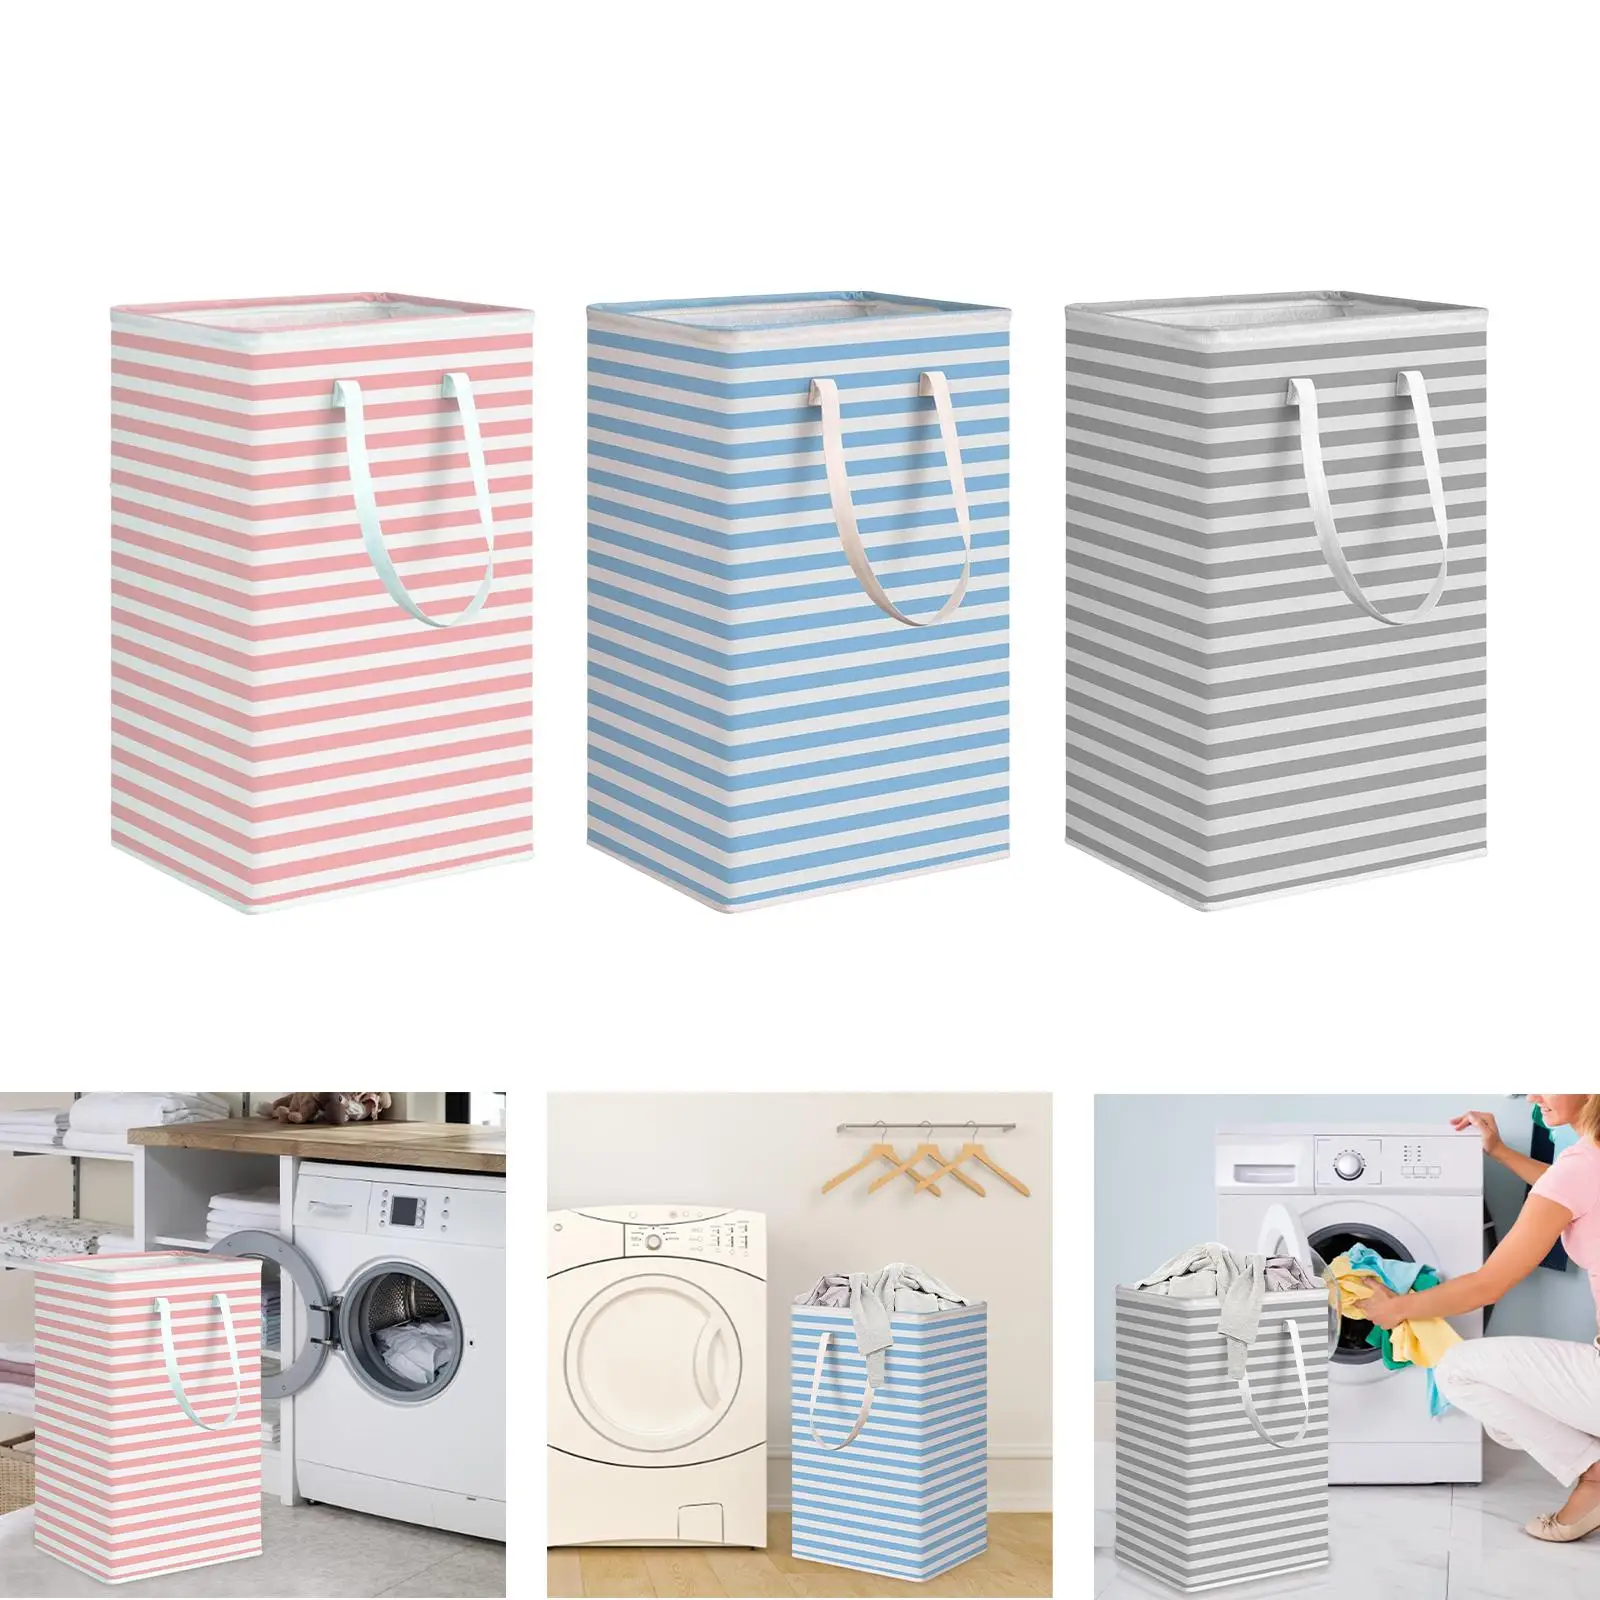 Waterproof 75L Collapsible Large Laundry Basket with Easy Carry Handles Laundry Hamper for Apartments Utility Room Bedroom Dorm